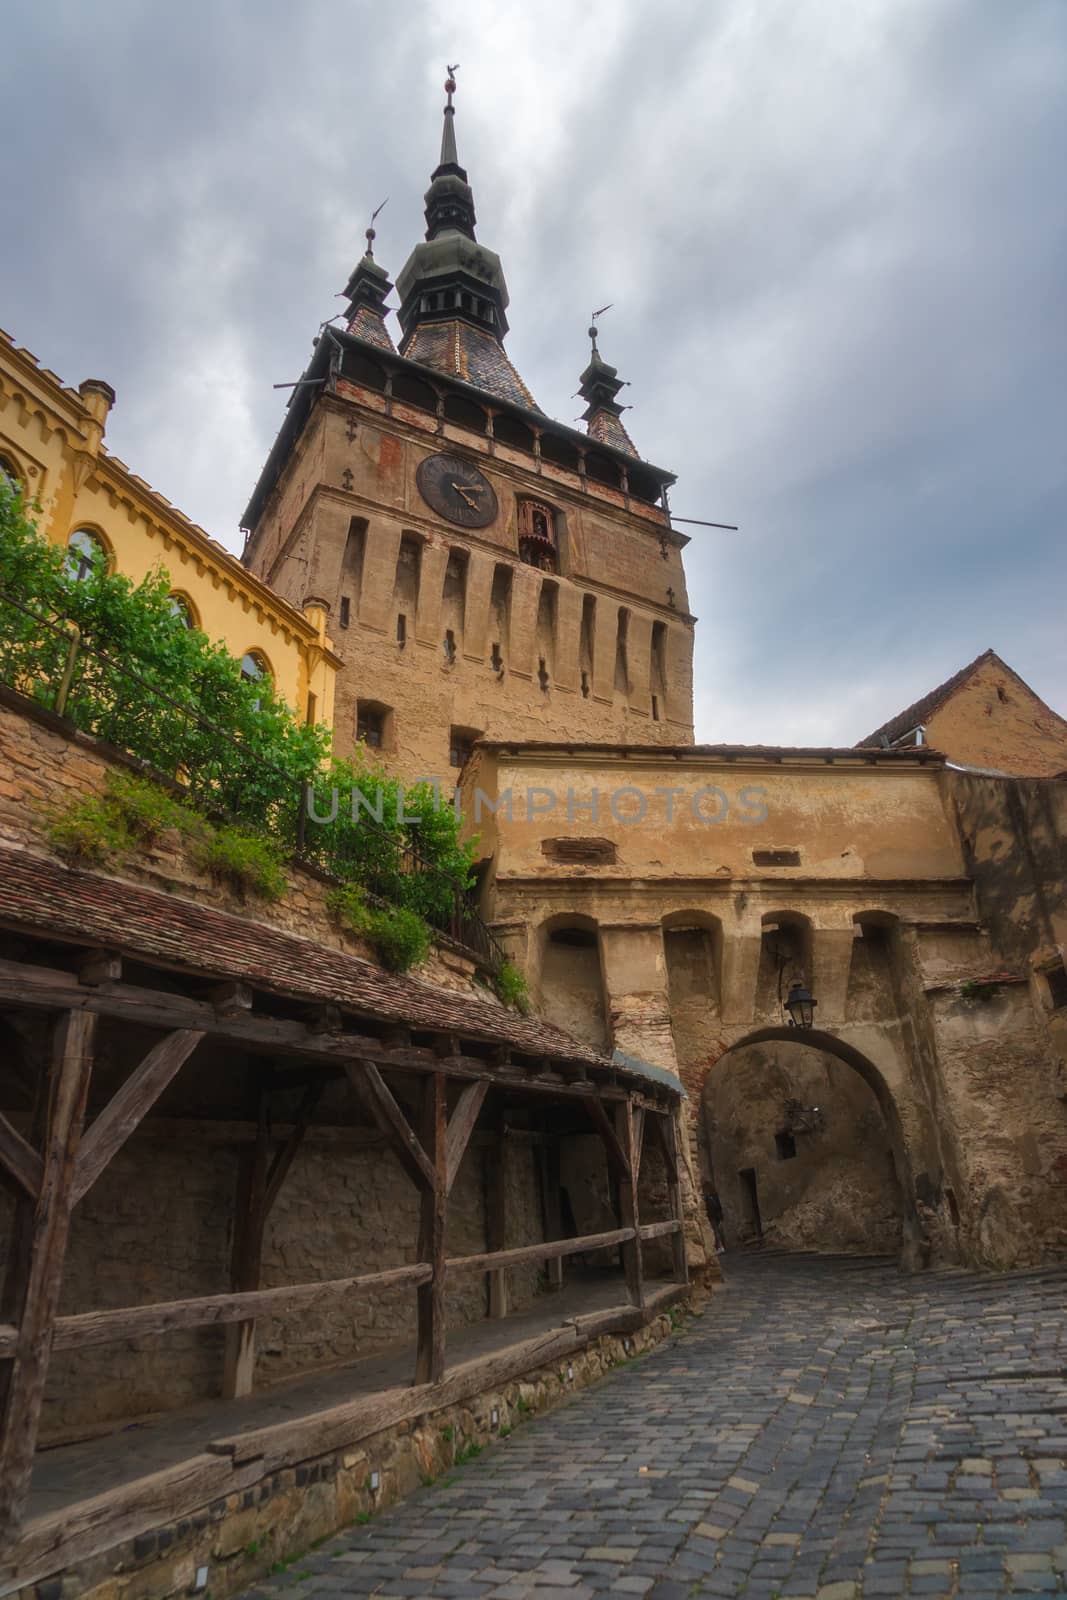 The CIty of Sighisoara in Romania by adonis_abril